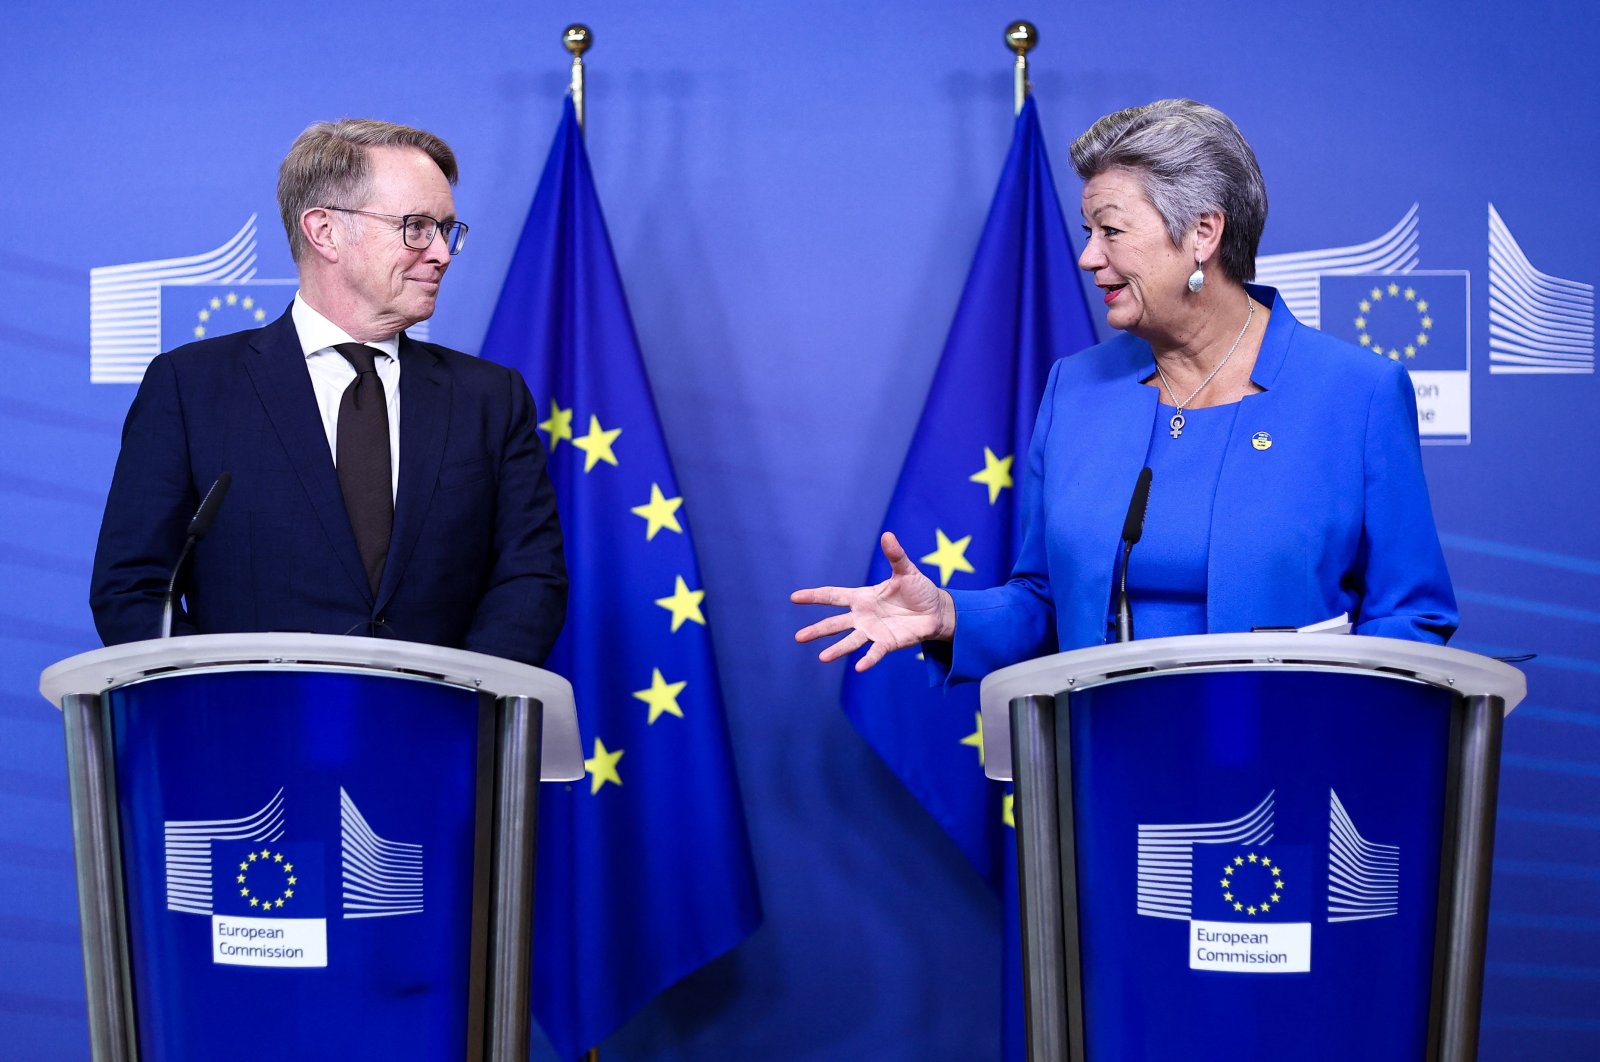 European Commissioner for Home Affairs Ylva Johansson (R) and new Executive Director of the European Border and Coast Guard (FRONTEX) Hans Leijtens give a news conference at the EU headquarters in Brussels, Belgium, Jan. 19, 2023. (AFP Photo)